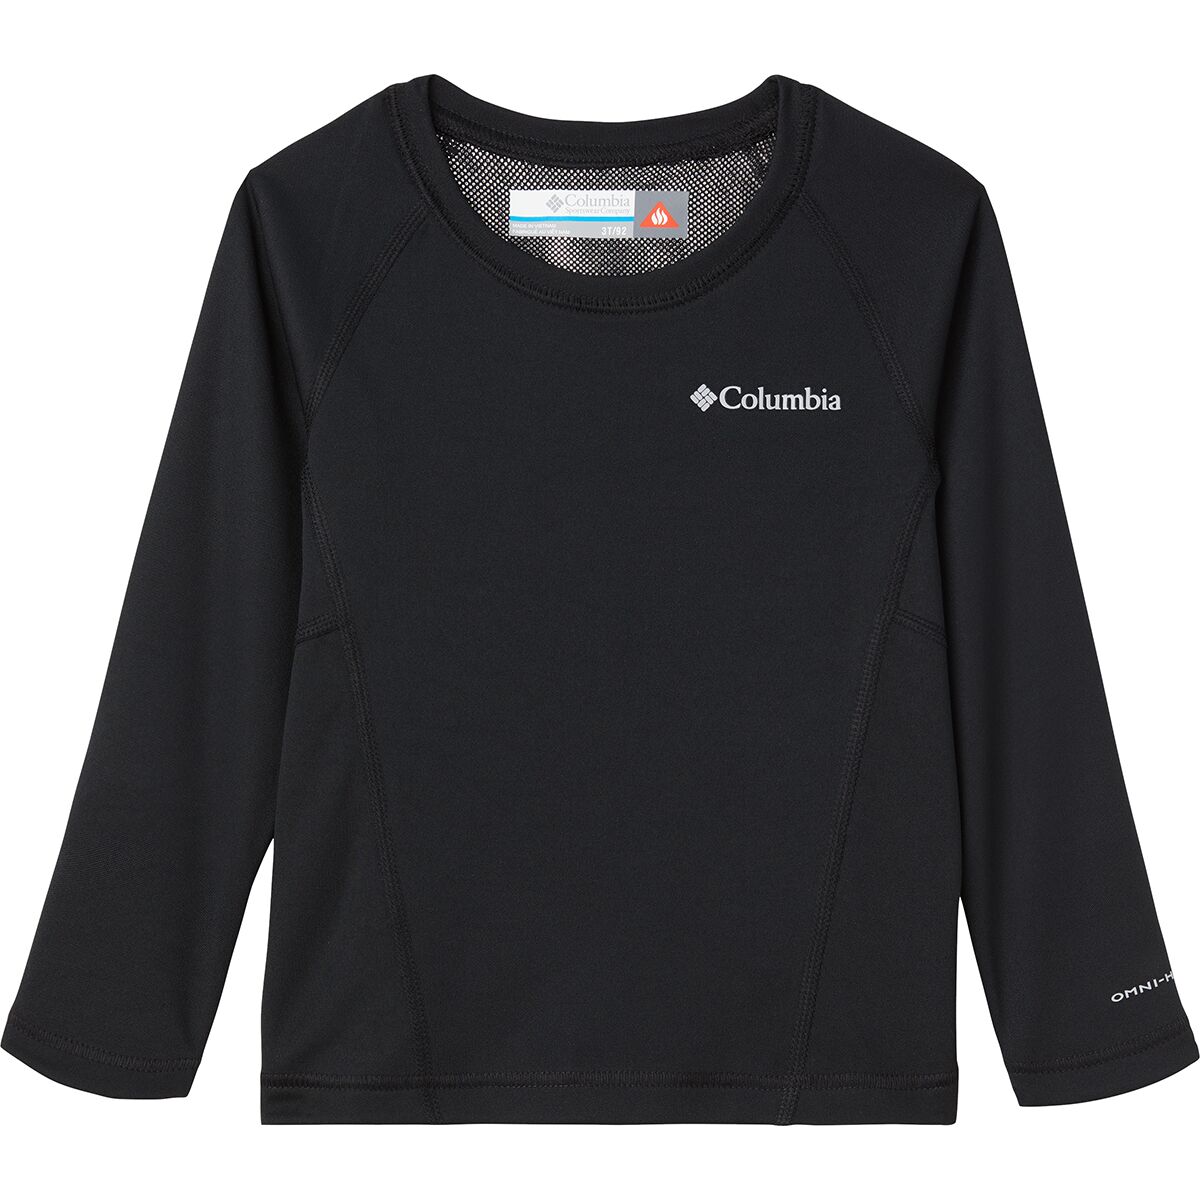 Columbia Baselayer Midweight 2 Crew Top - Toddlers'